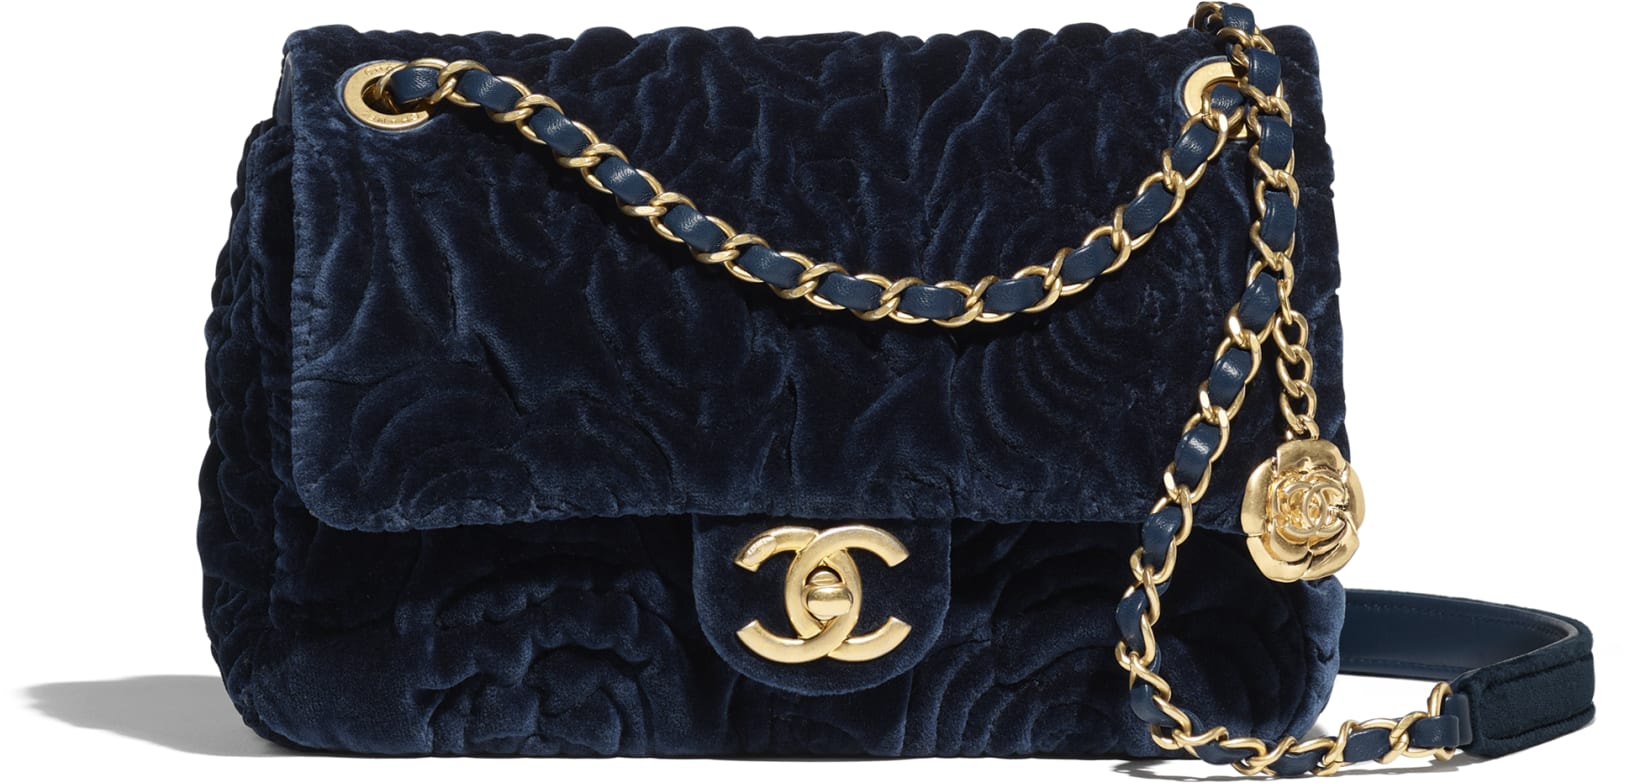 Chanel Pre-Fall 2021 Small Leather Goods Collection - Spotted Fashion